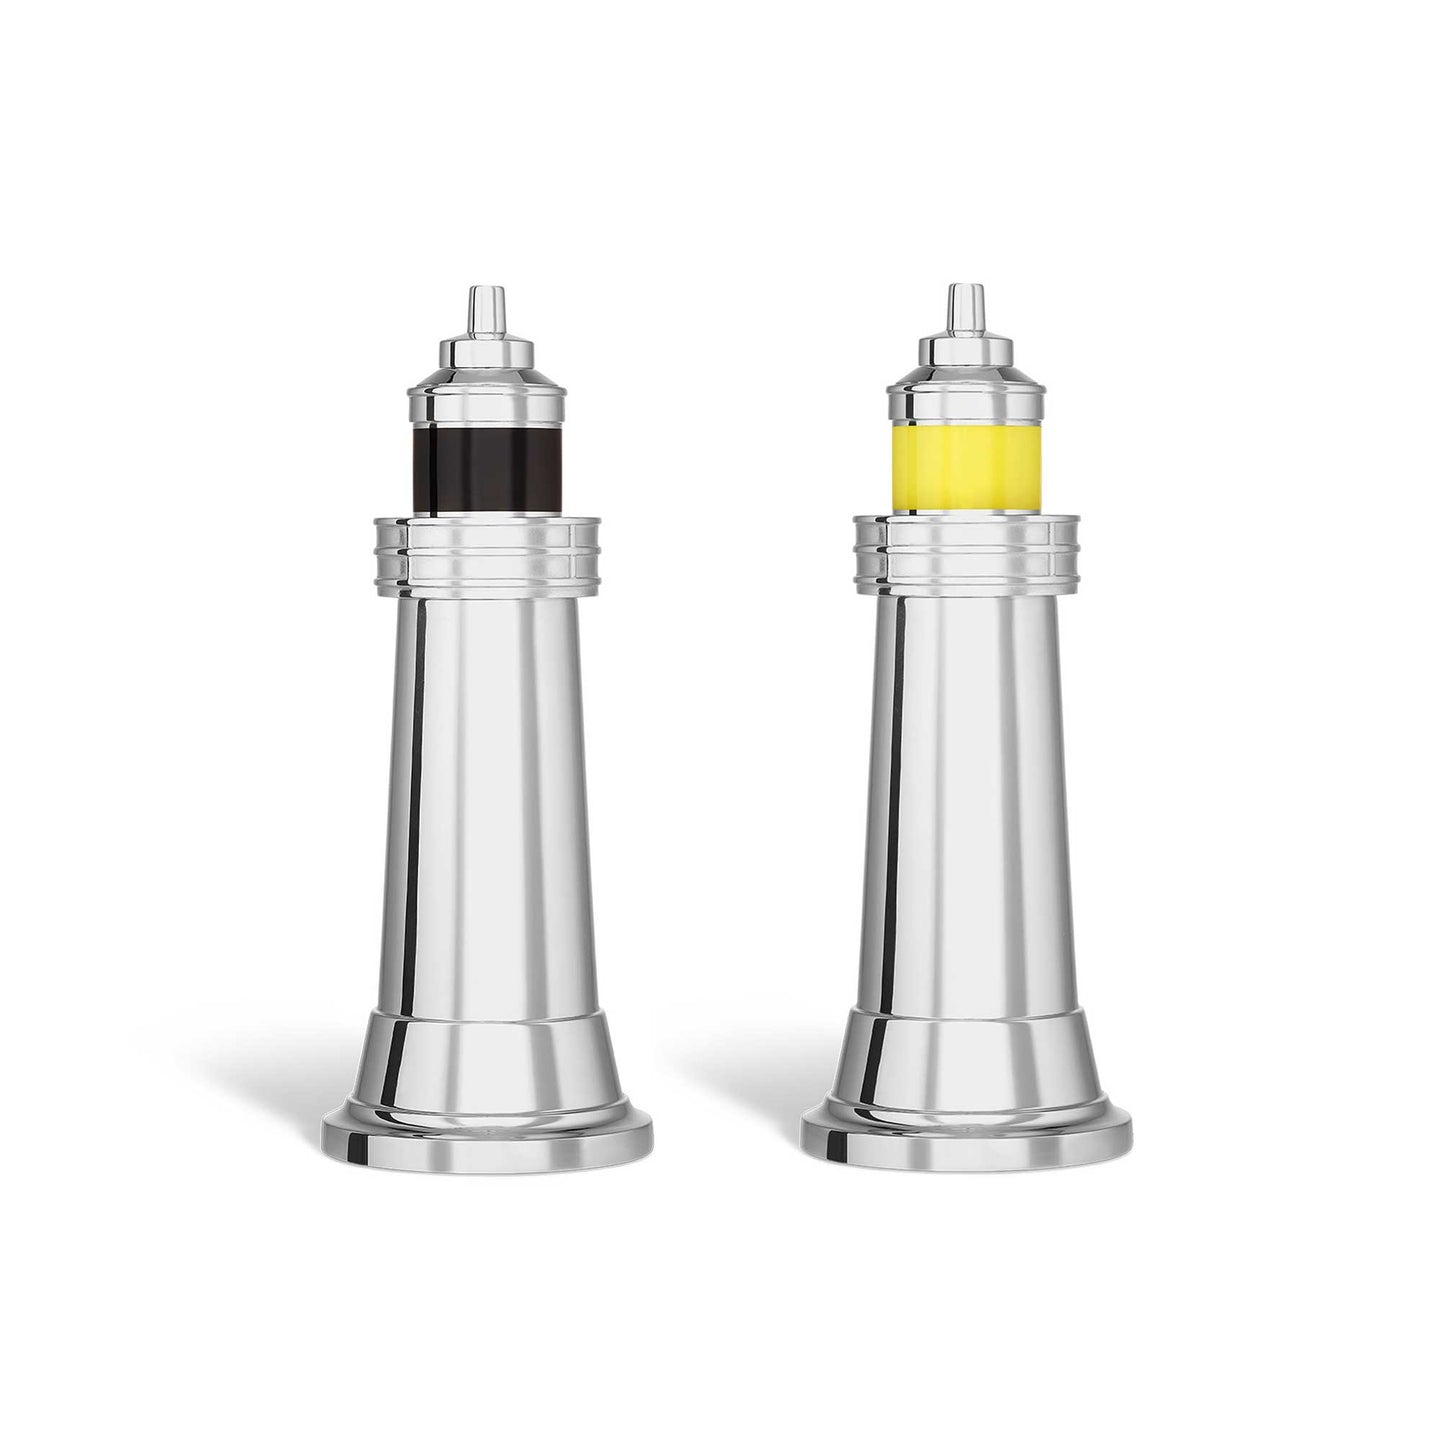 Lighthouse Salt and Pepper Mills in Sterling Silver